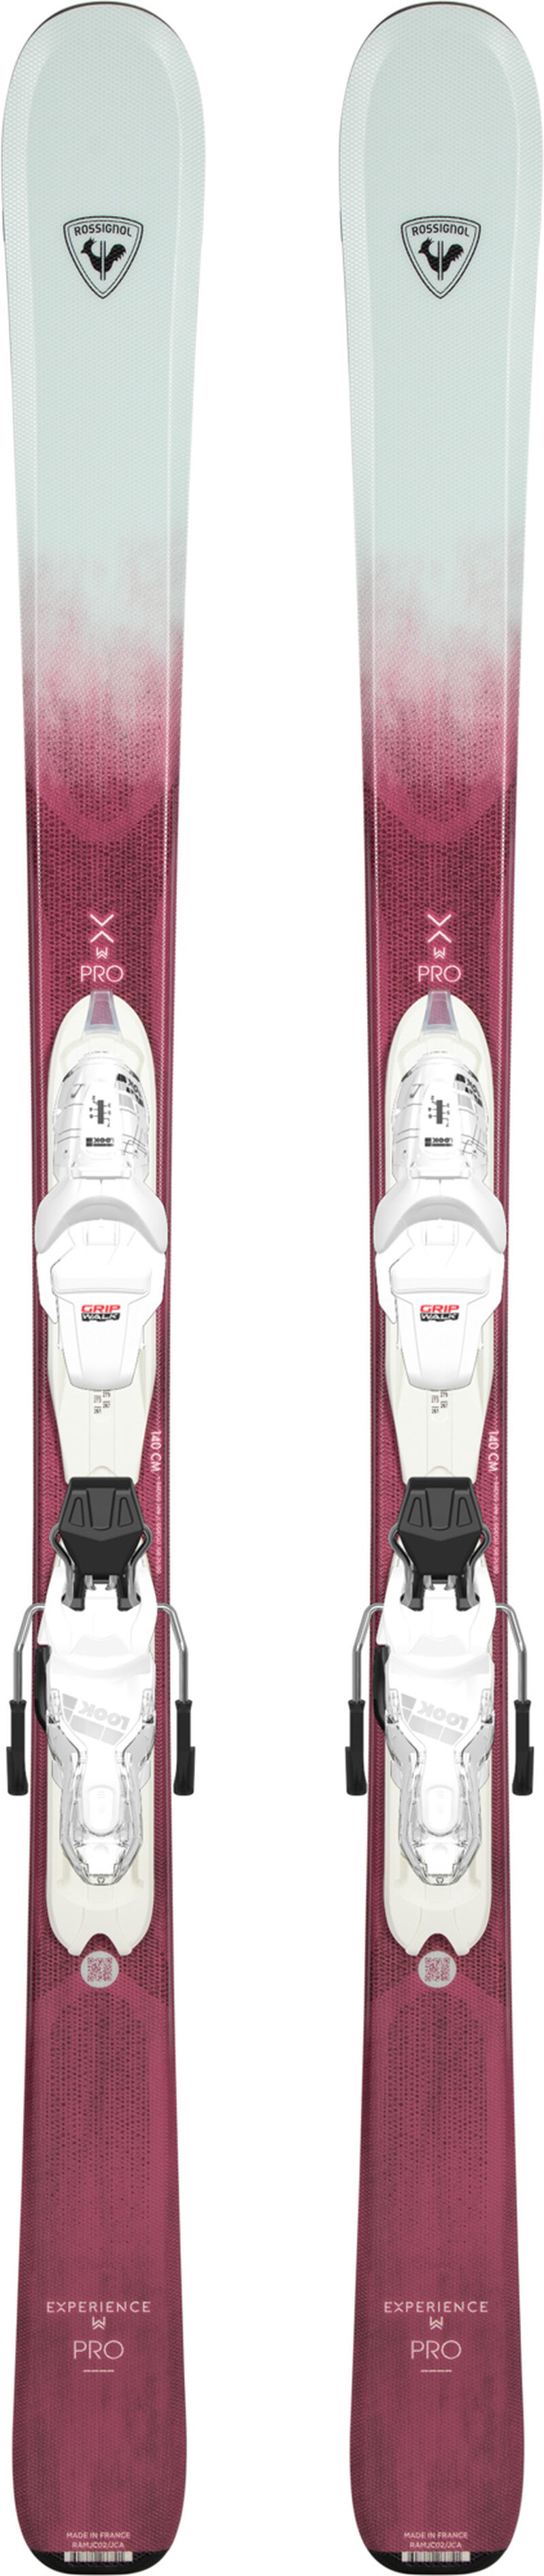 Rossignol Skis All Mountain enfant EXPERIENCE W PRO (XPRESS JR ) 